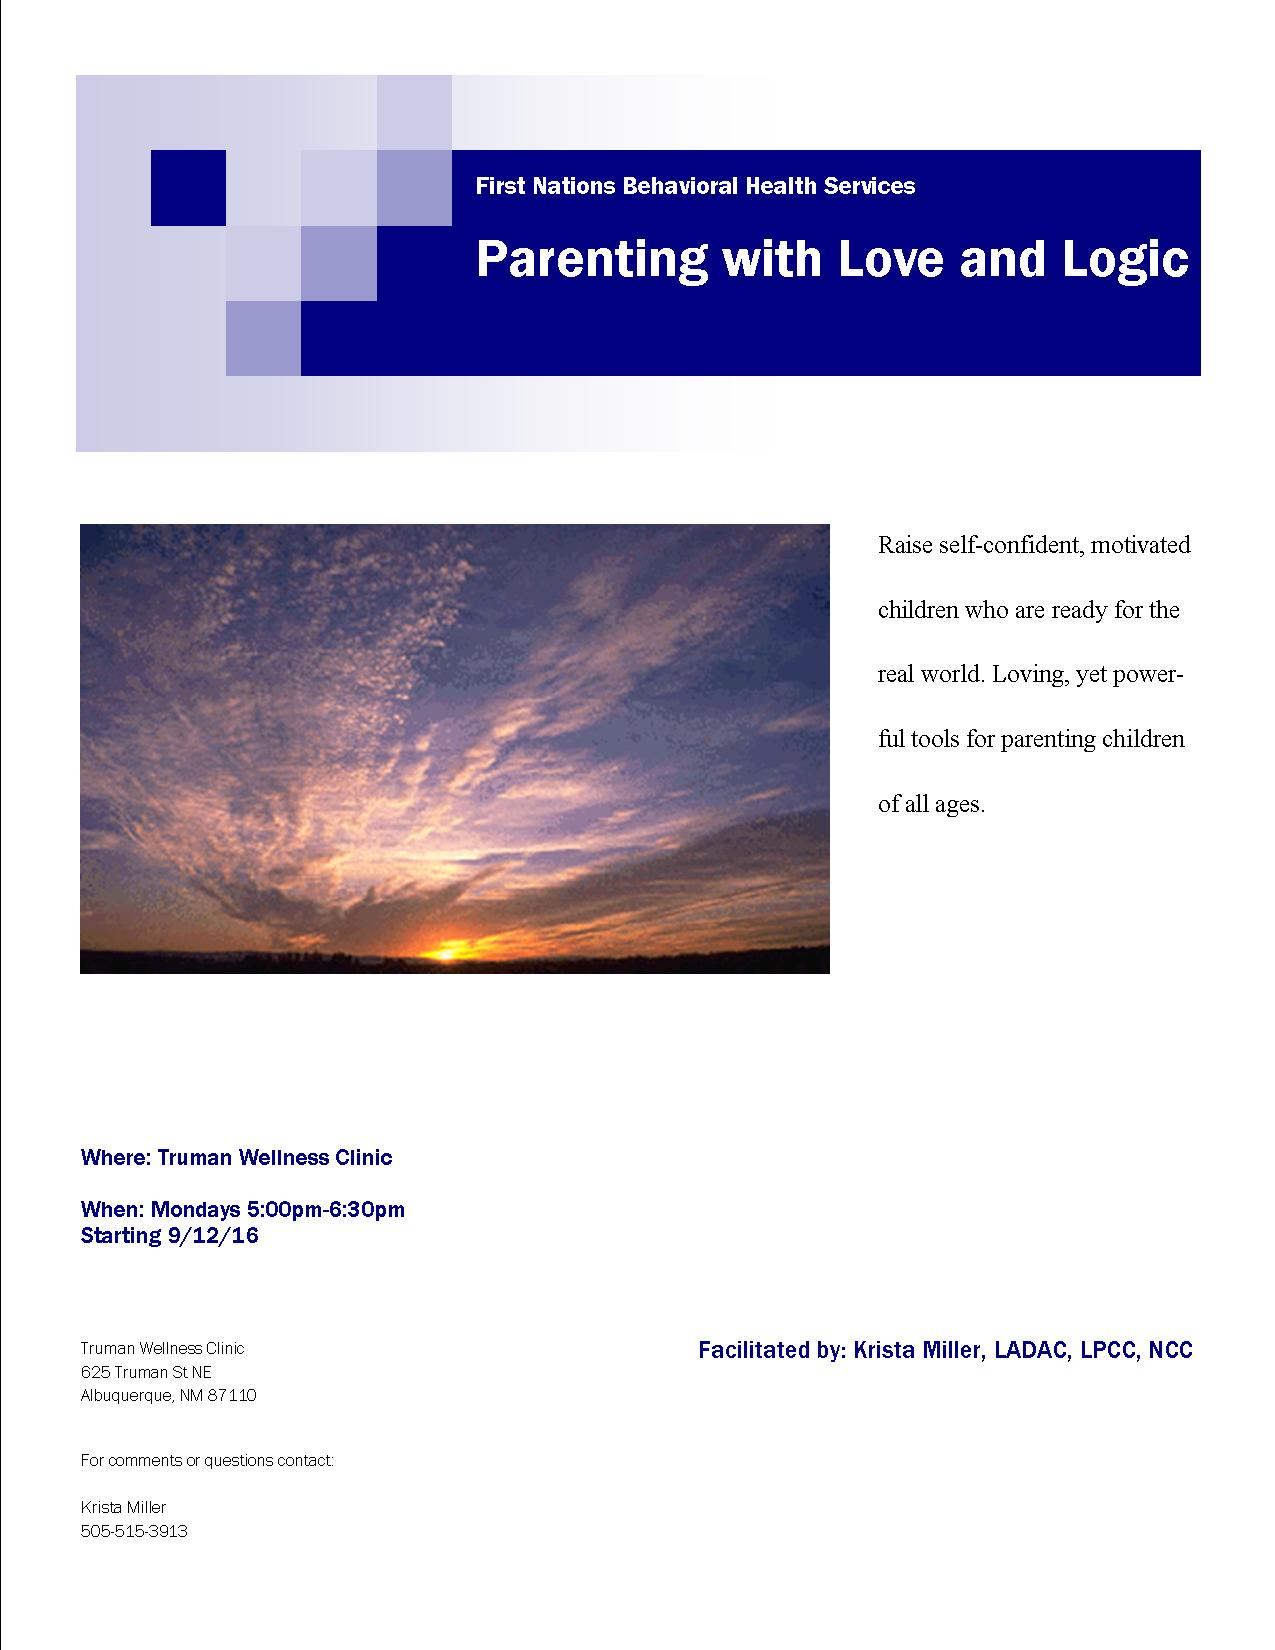 First Nations Behavioral Health Services Parenting with Love and Logic Raise self-confident, motivated children who are ready for the real world. Loving, yet powerful tools for parenting children of all ages.